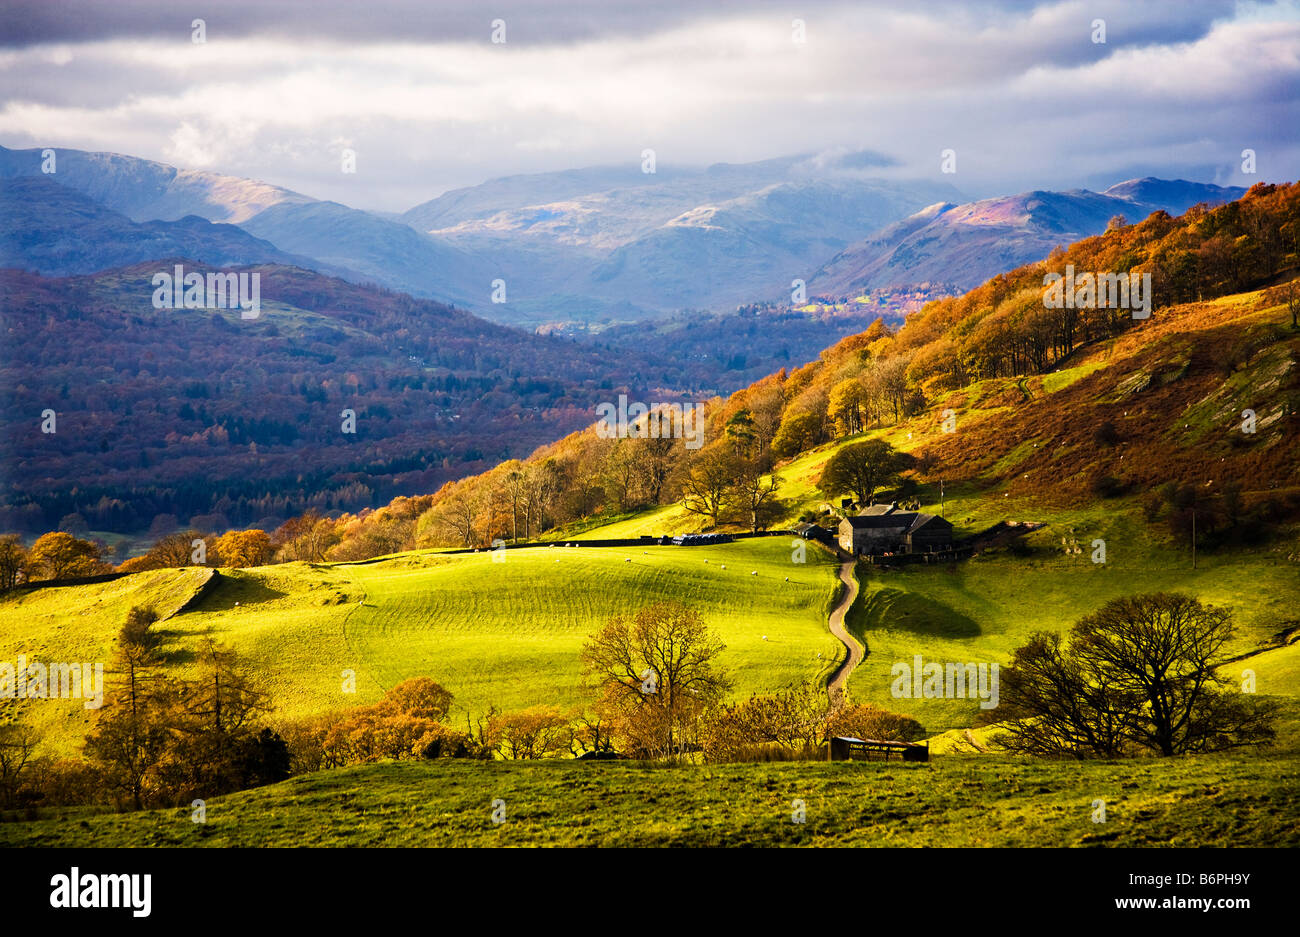 Autumn view over the countryside near Troutbeck and Ambleside in the Lake District Cumbria England UK Stock Photo